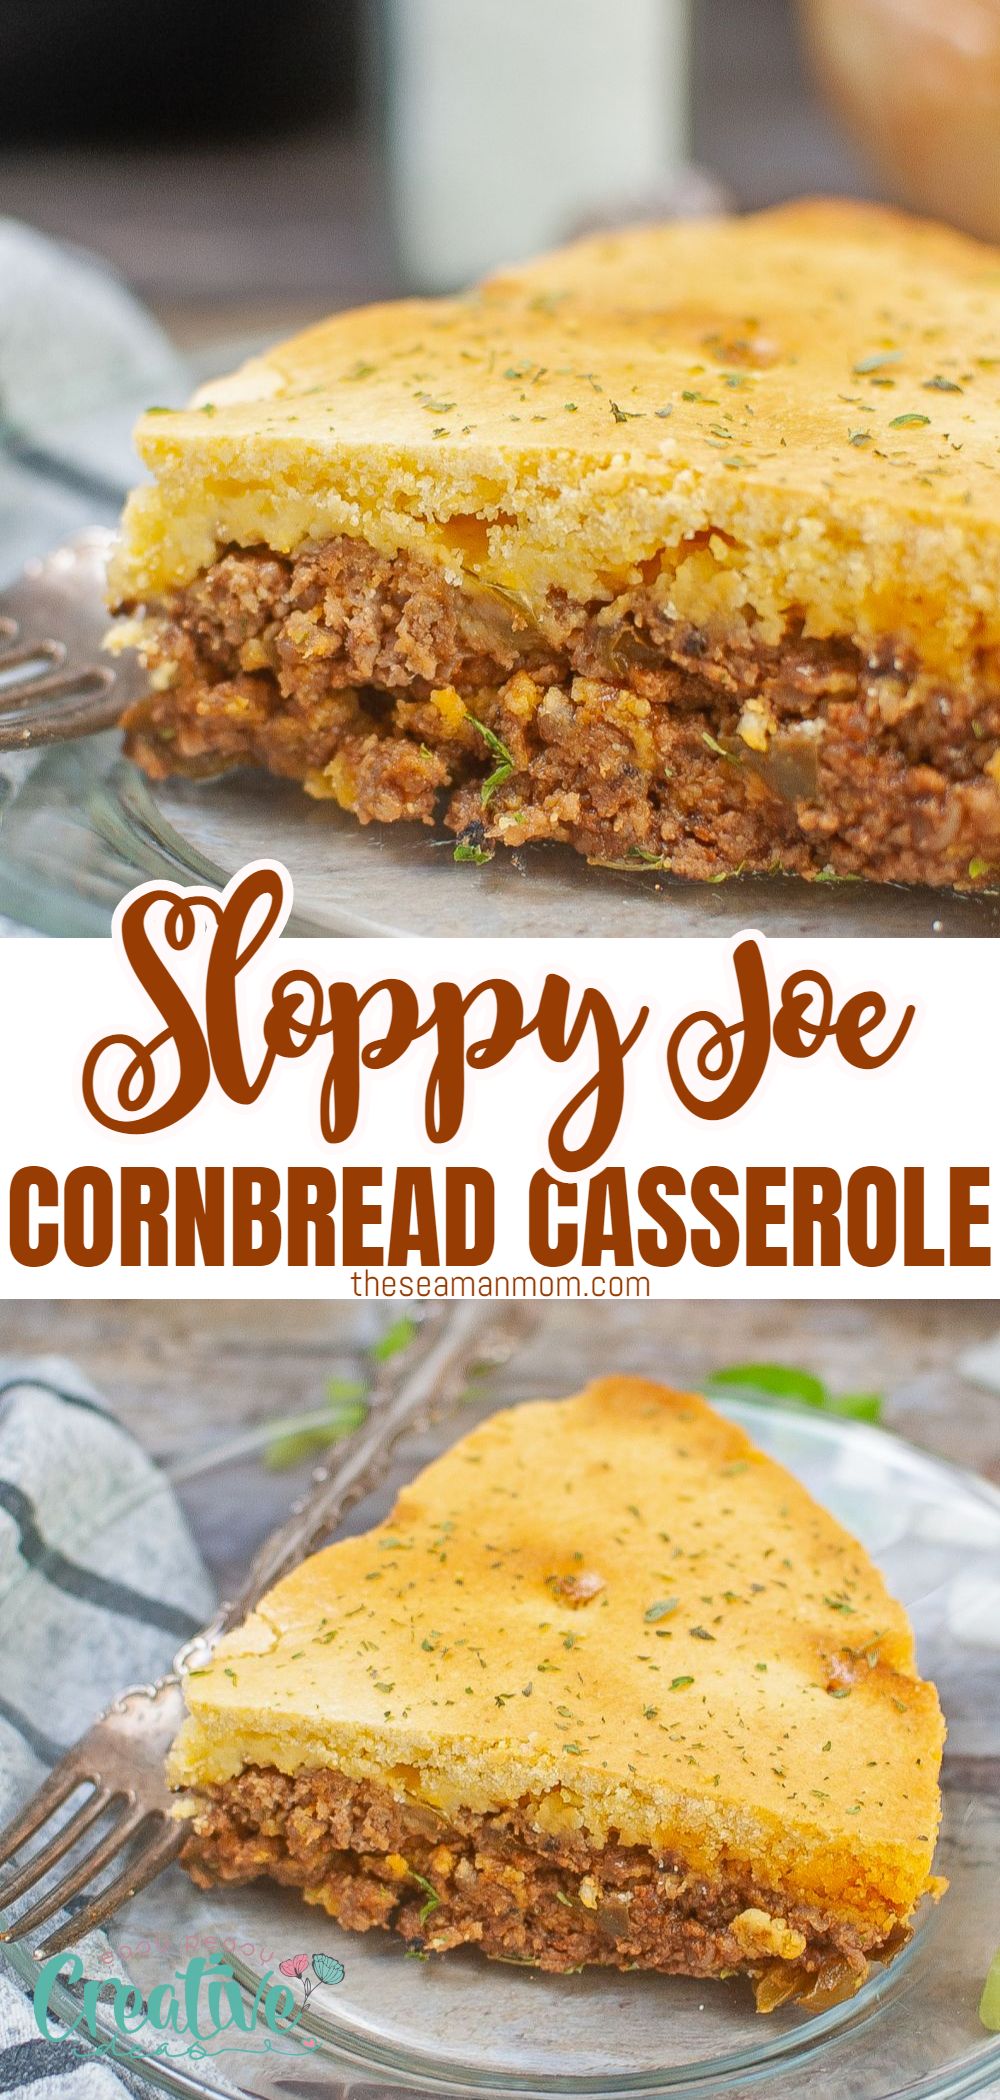 Whether you're feeding a family or looking for a quick and easy weeknight dinner, this simple air fryer cornbread is sure to be a hit. So what are you waiting for? Start whipping up this delicious Sloppy Joe cornbread casserole today! This hearty and satisfying dish is sure to be a crowd-pleaser at your next dinner party or family get-together. via @petroneagu